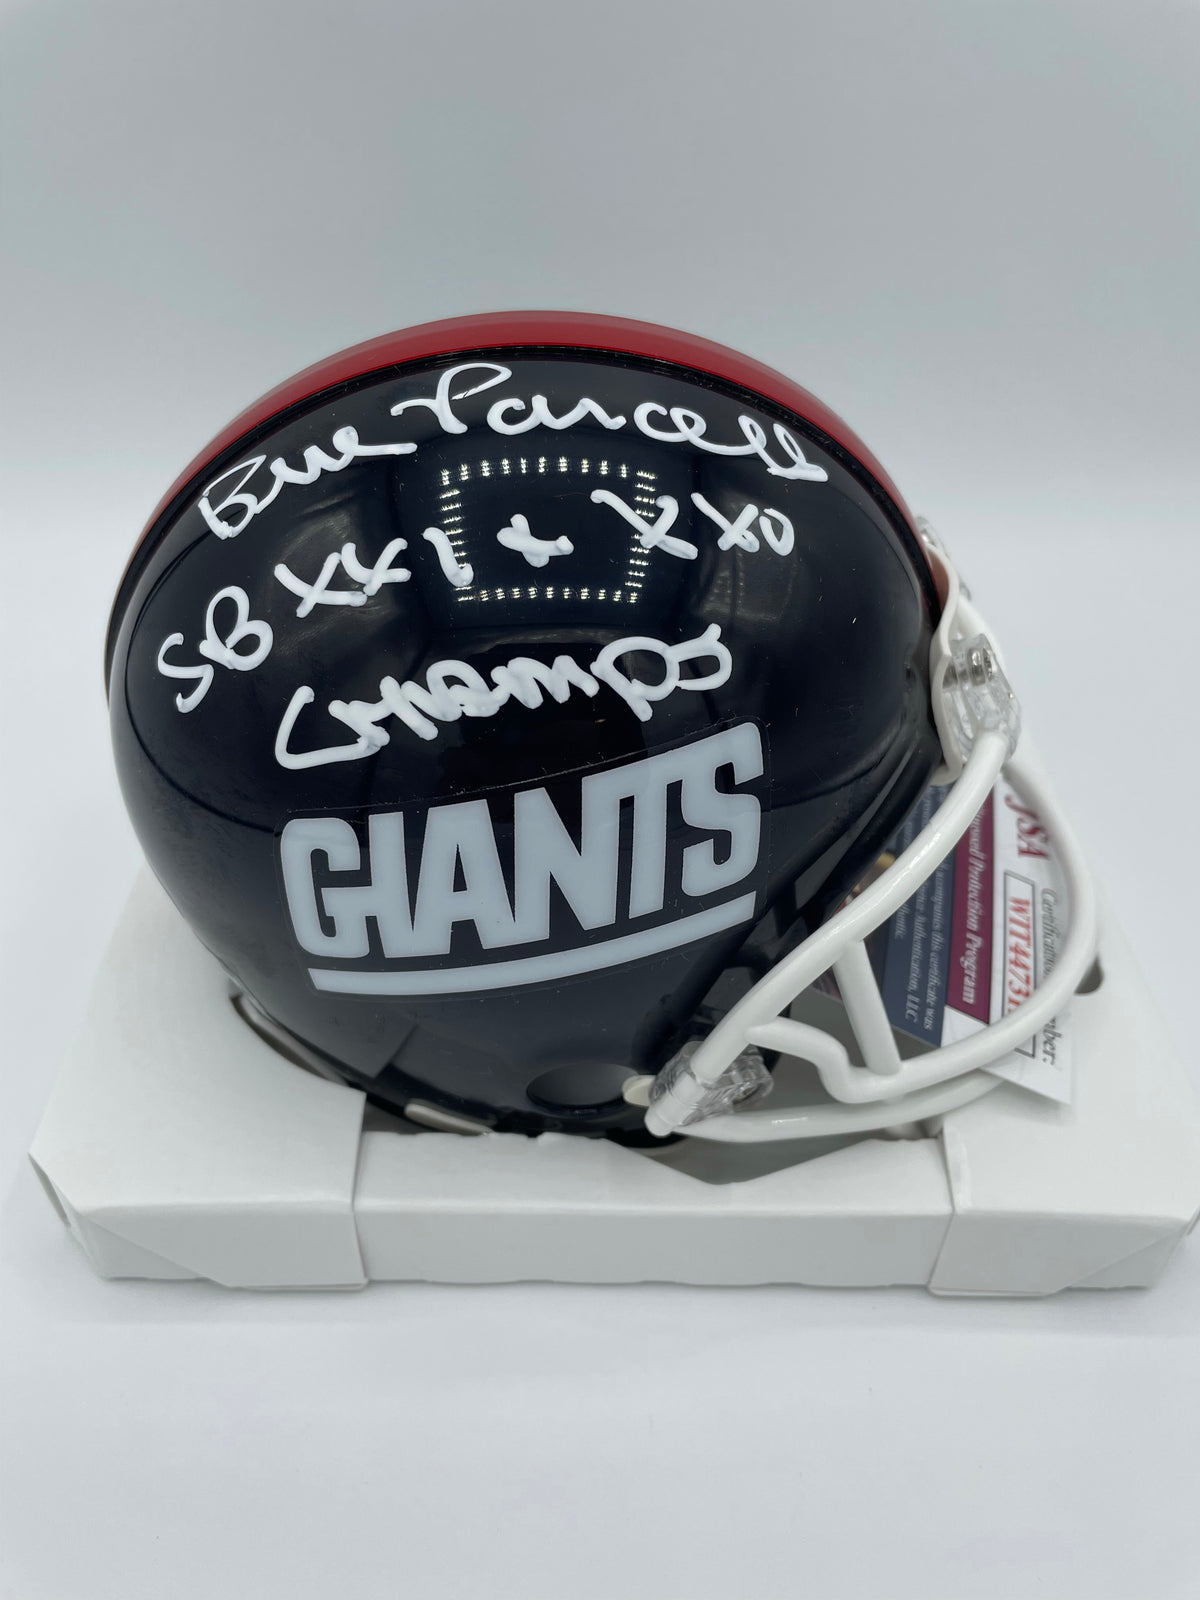 Lawrence Taylor Signed New York Giants 1981-99 Throwback Mini